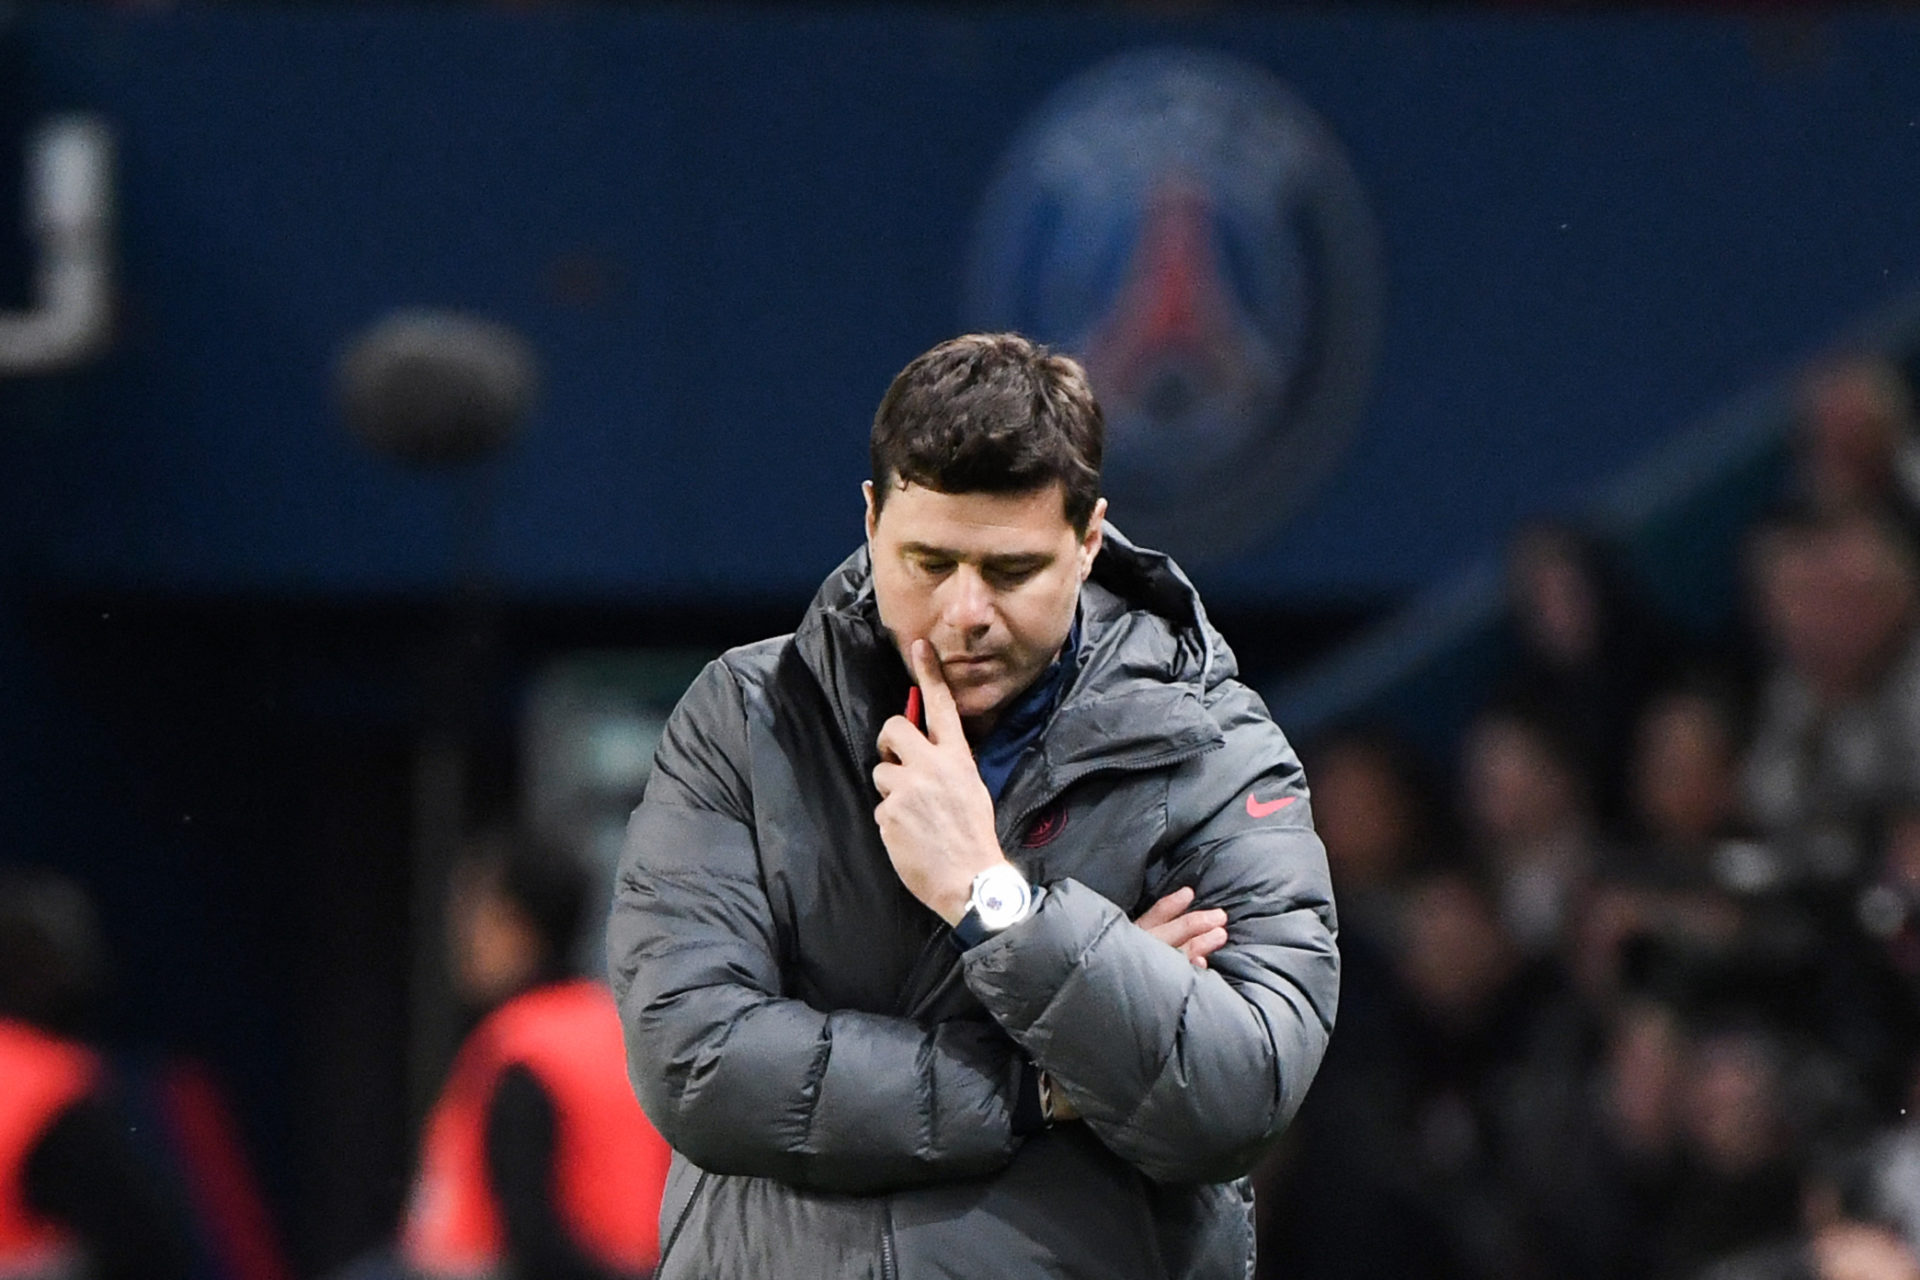 West Ham insiders have provided an update on Mauricio Pochettino potentially replacing David Moyes